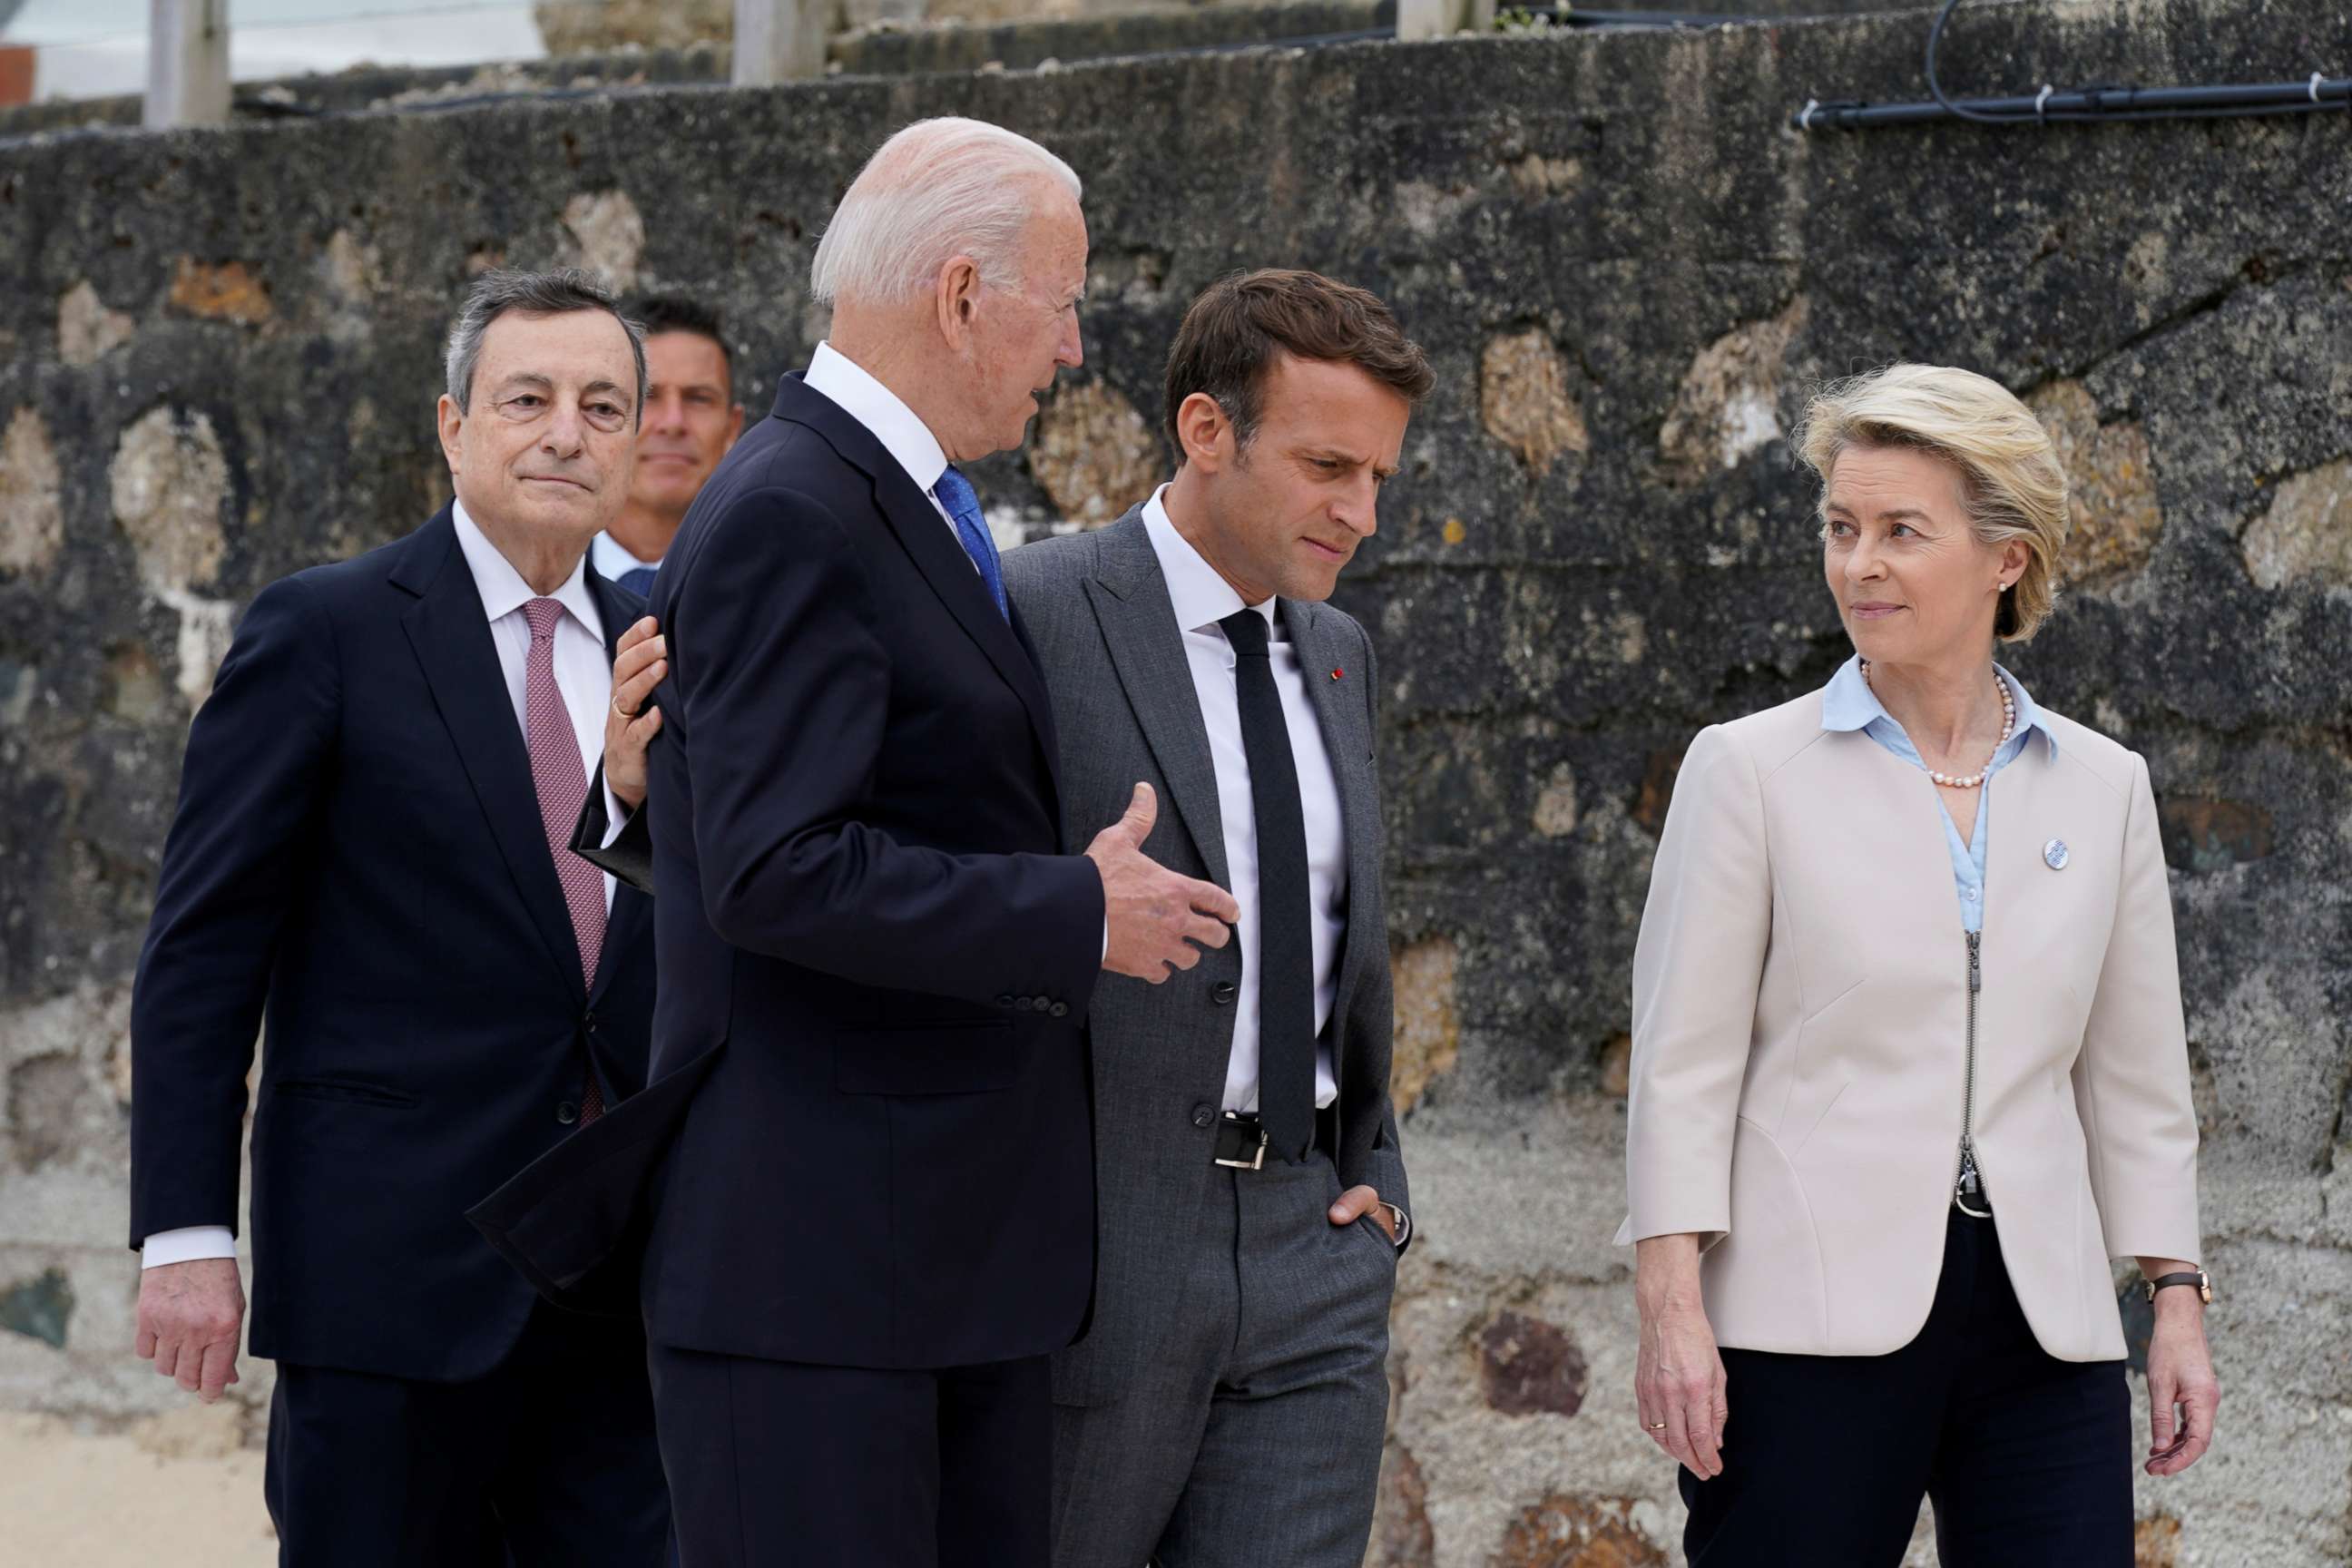 PHOTO: President Joe Biden speaks with French President Emmanuel Macron, European Commission President Ursula von der Leyen and Italian Prime Minister Mario Draghi, after posing for the family photo at the G7 summit, in Carbis Bay, Britain, June 11, 2021.